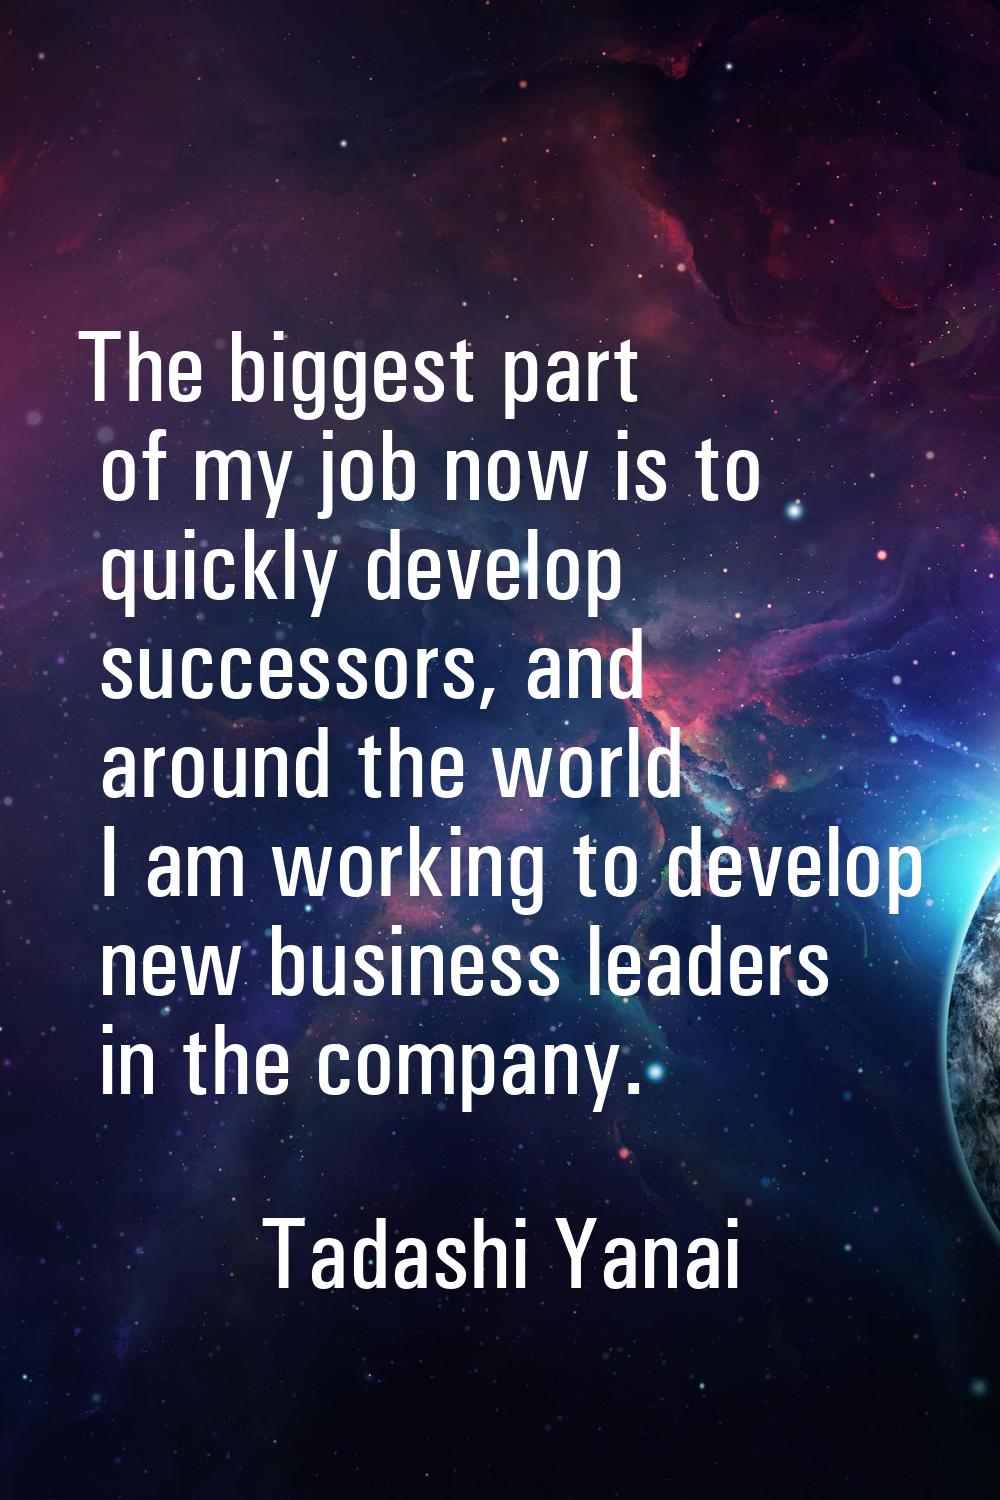 The biggest part of my job now is to quickly develop successors, and around the world I am working 